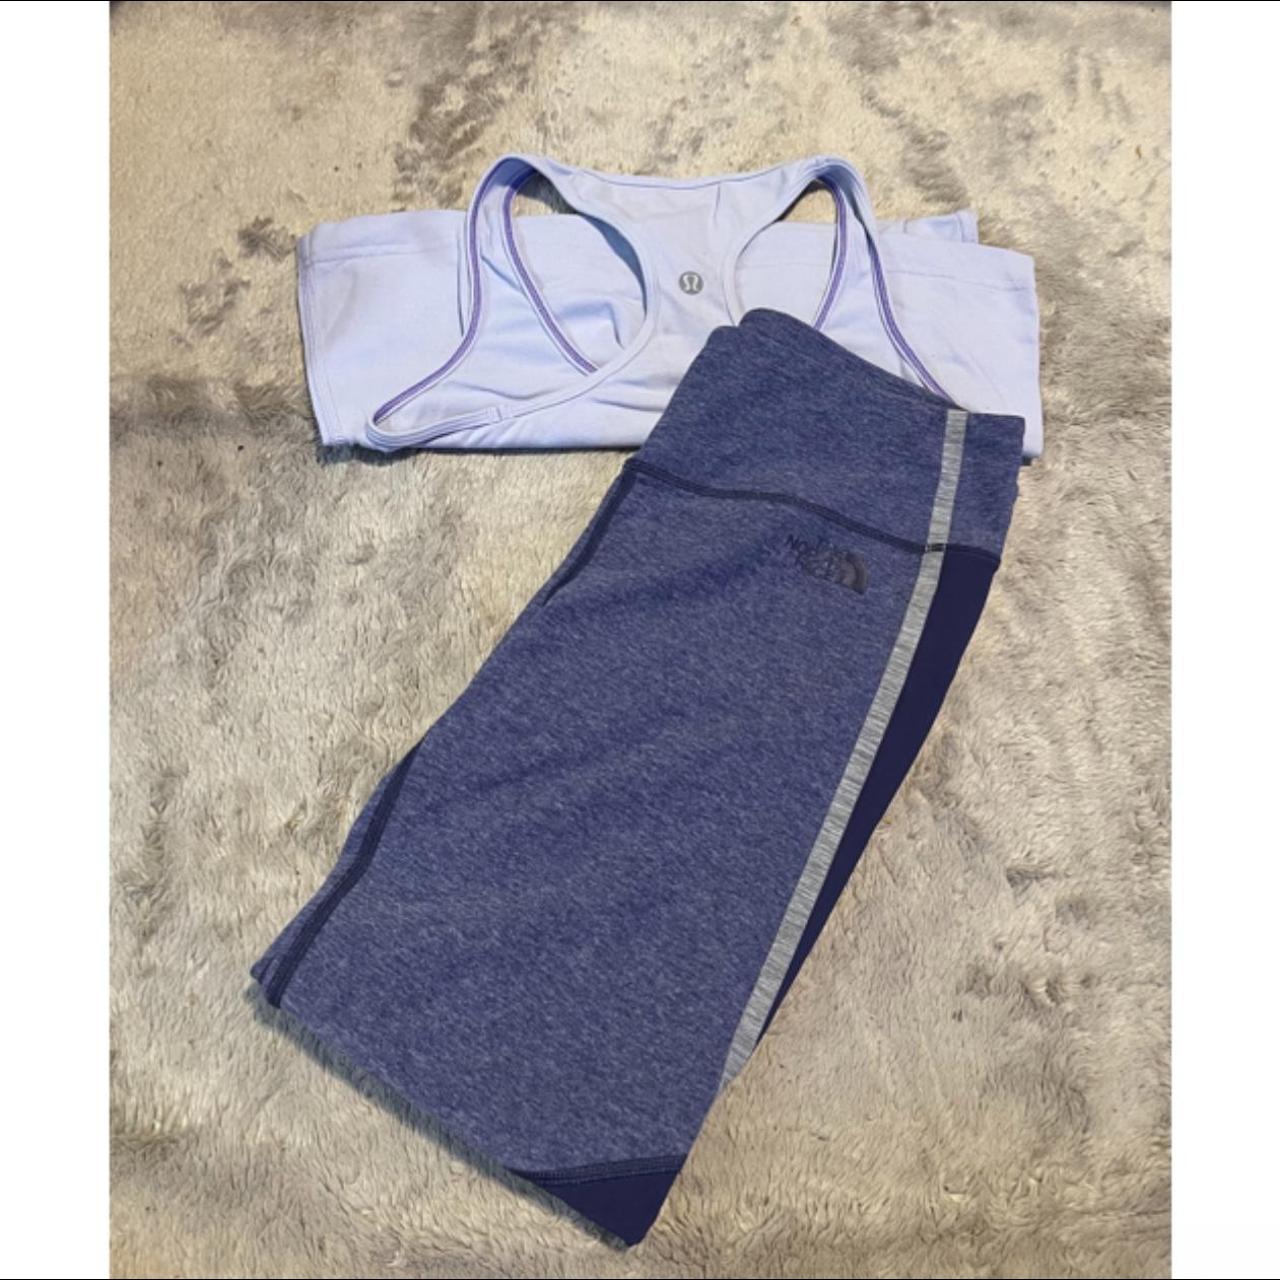 Product Image 1 - Workout Set
Lululemon Tank Top paired